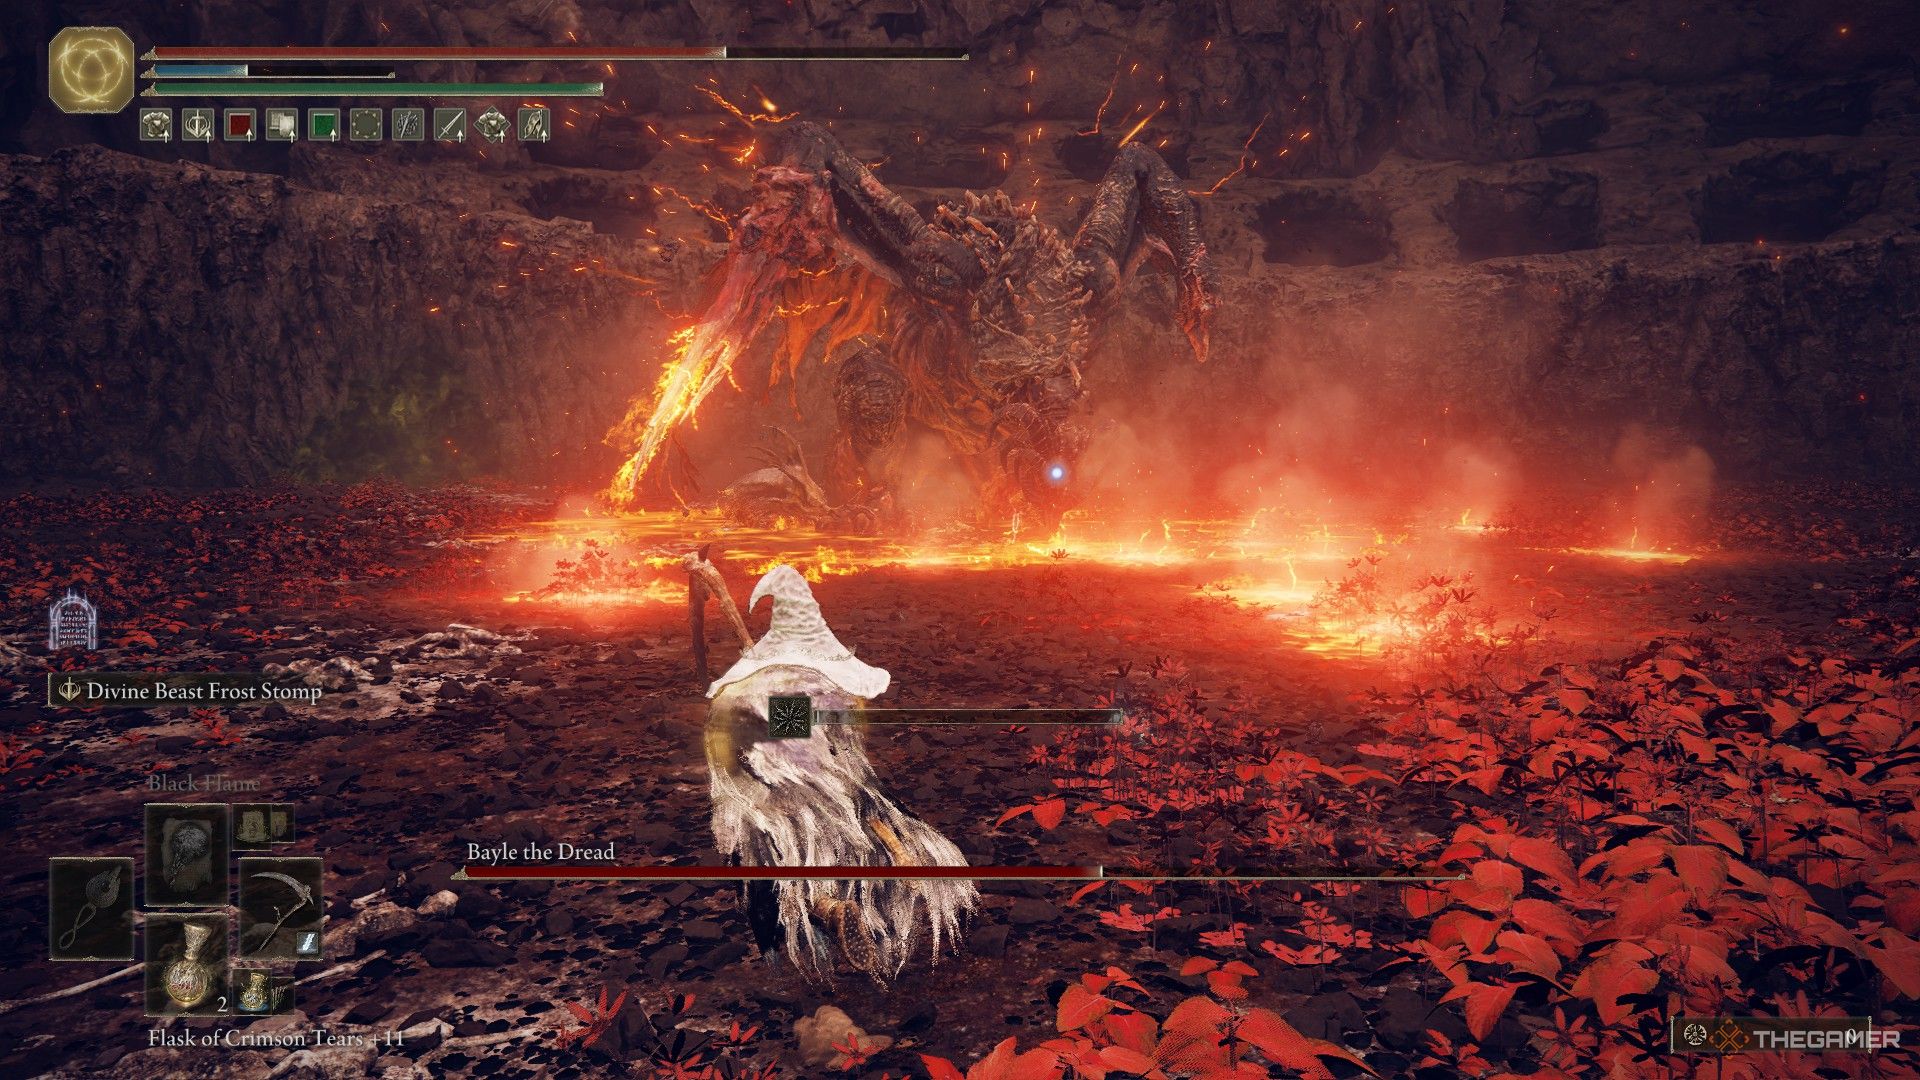 Player watches as Bayle summons pools of lava around himself, preparing to explode in Elden Ring: Shadow of the Erdtree.